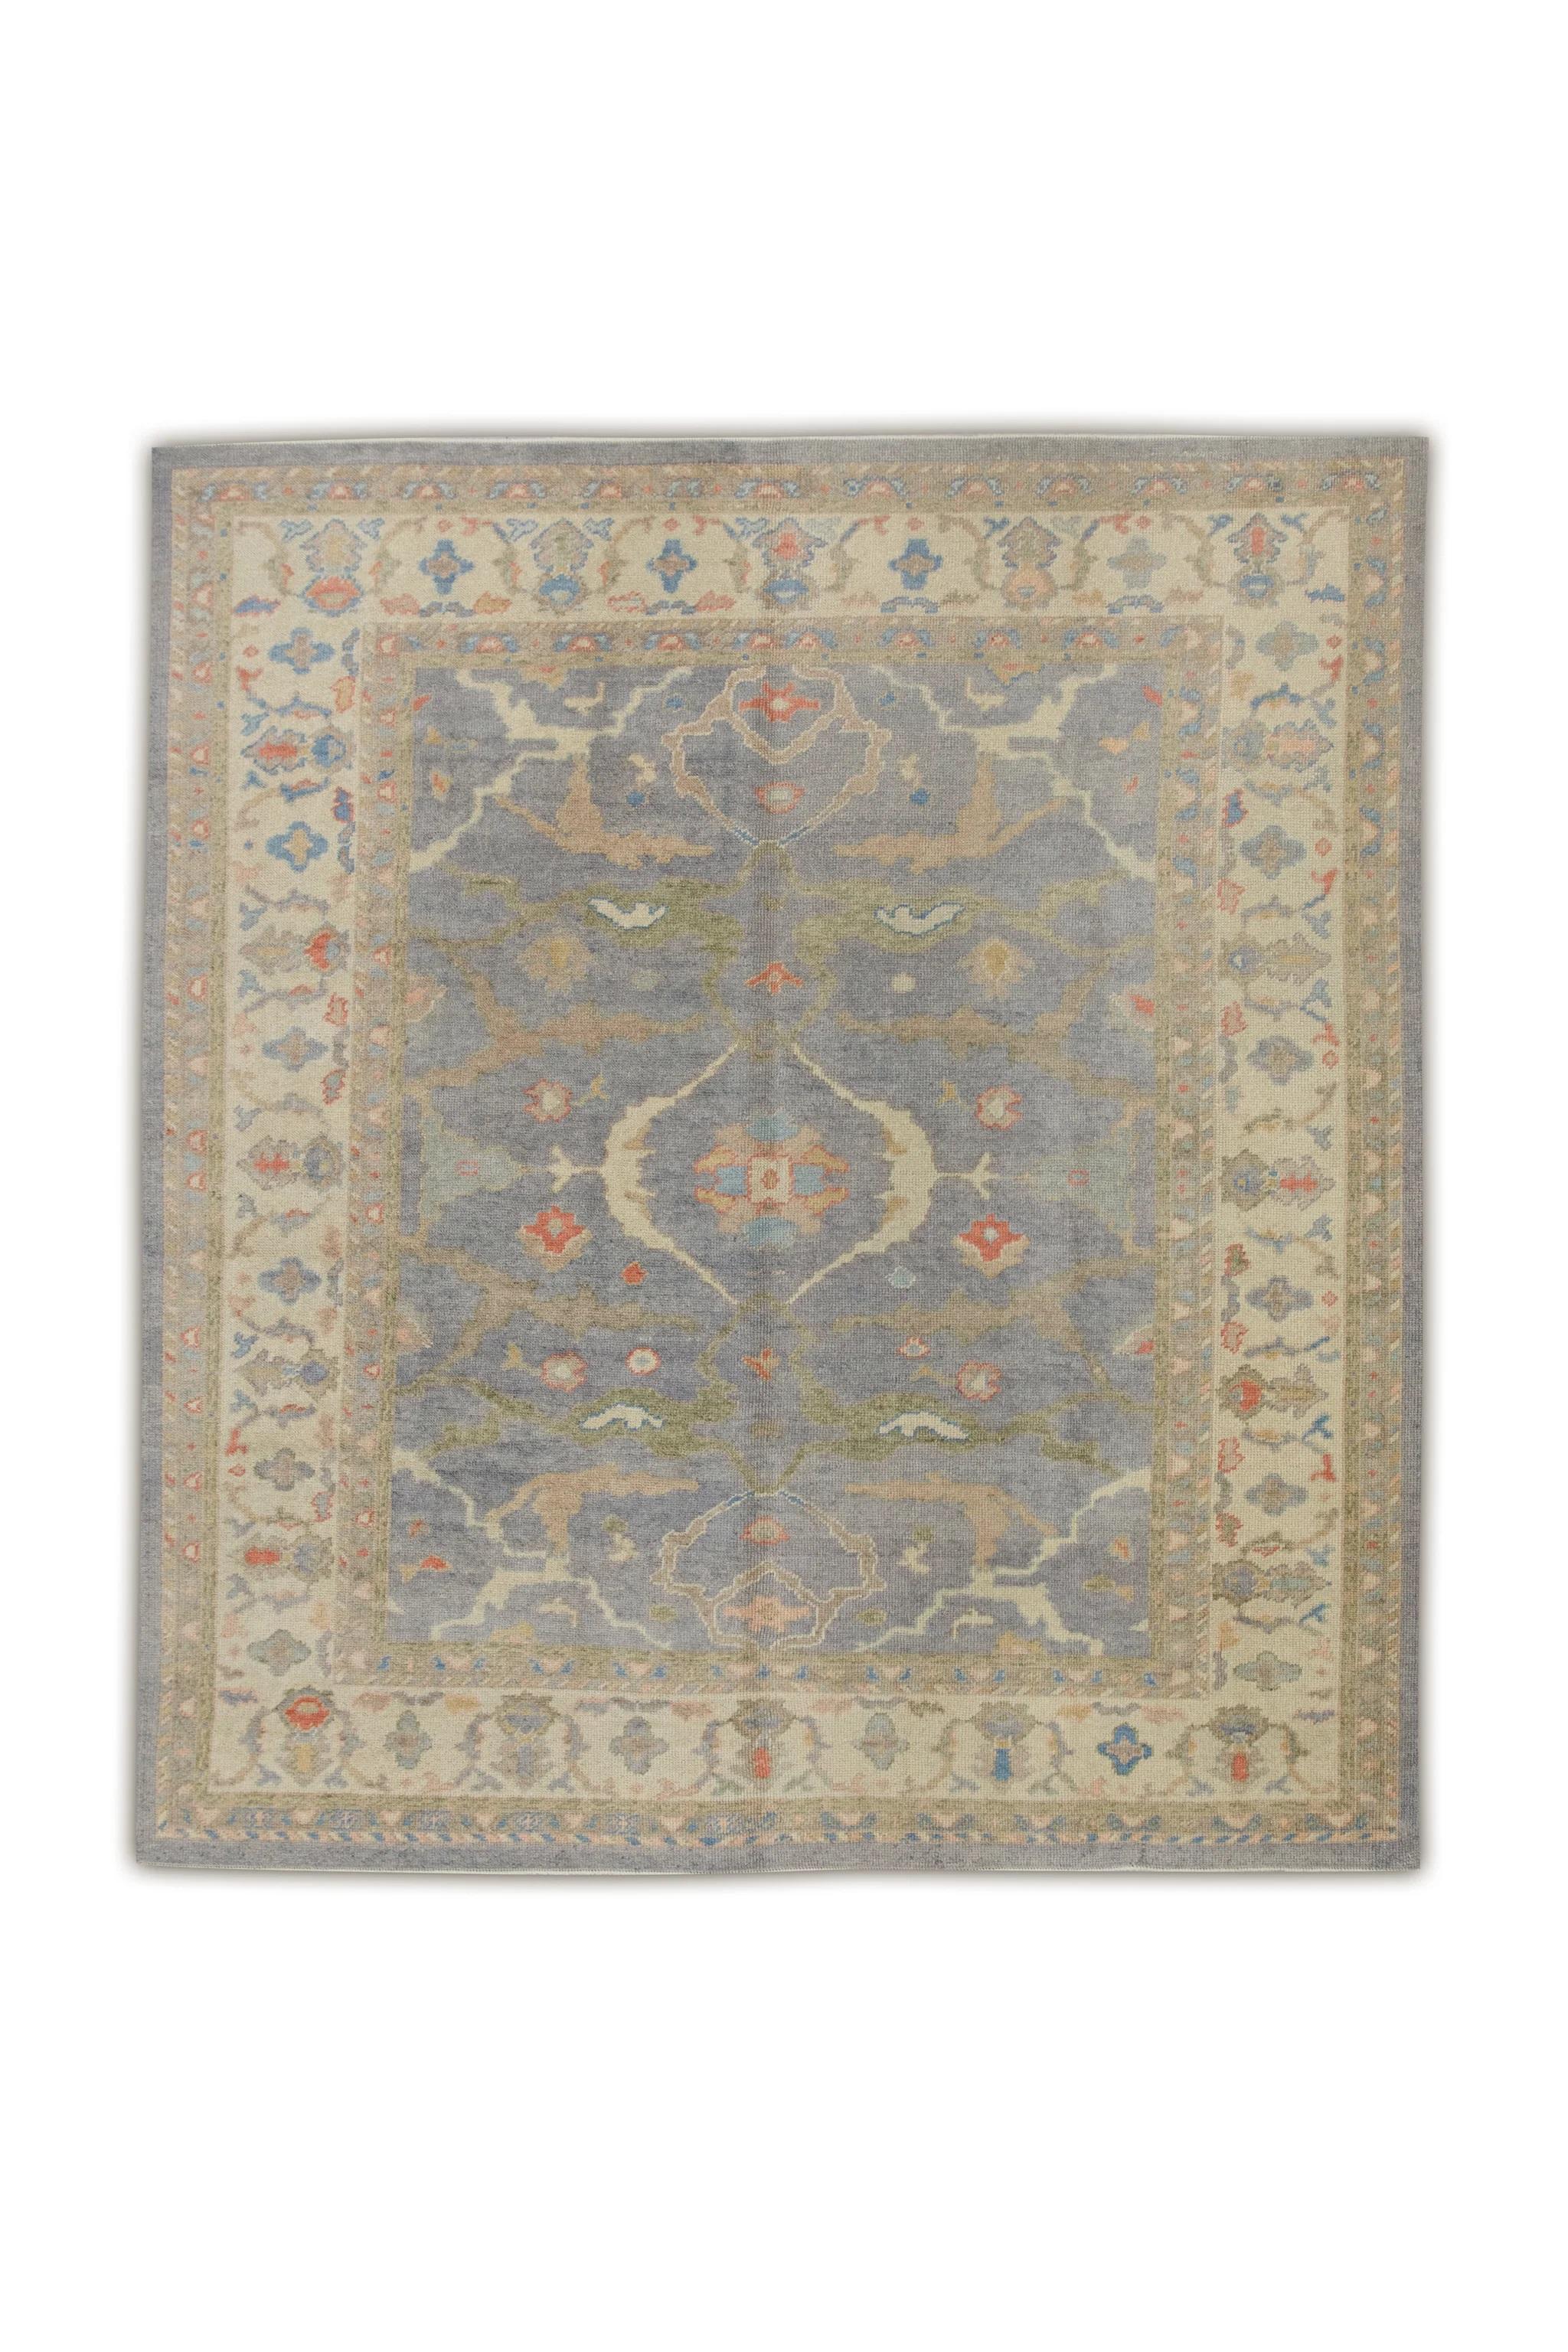 Contemporary Blue Handwoven Wool Turkish Oushak Rug in Multicolor Floral Pattern 8' x 8'11